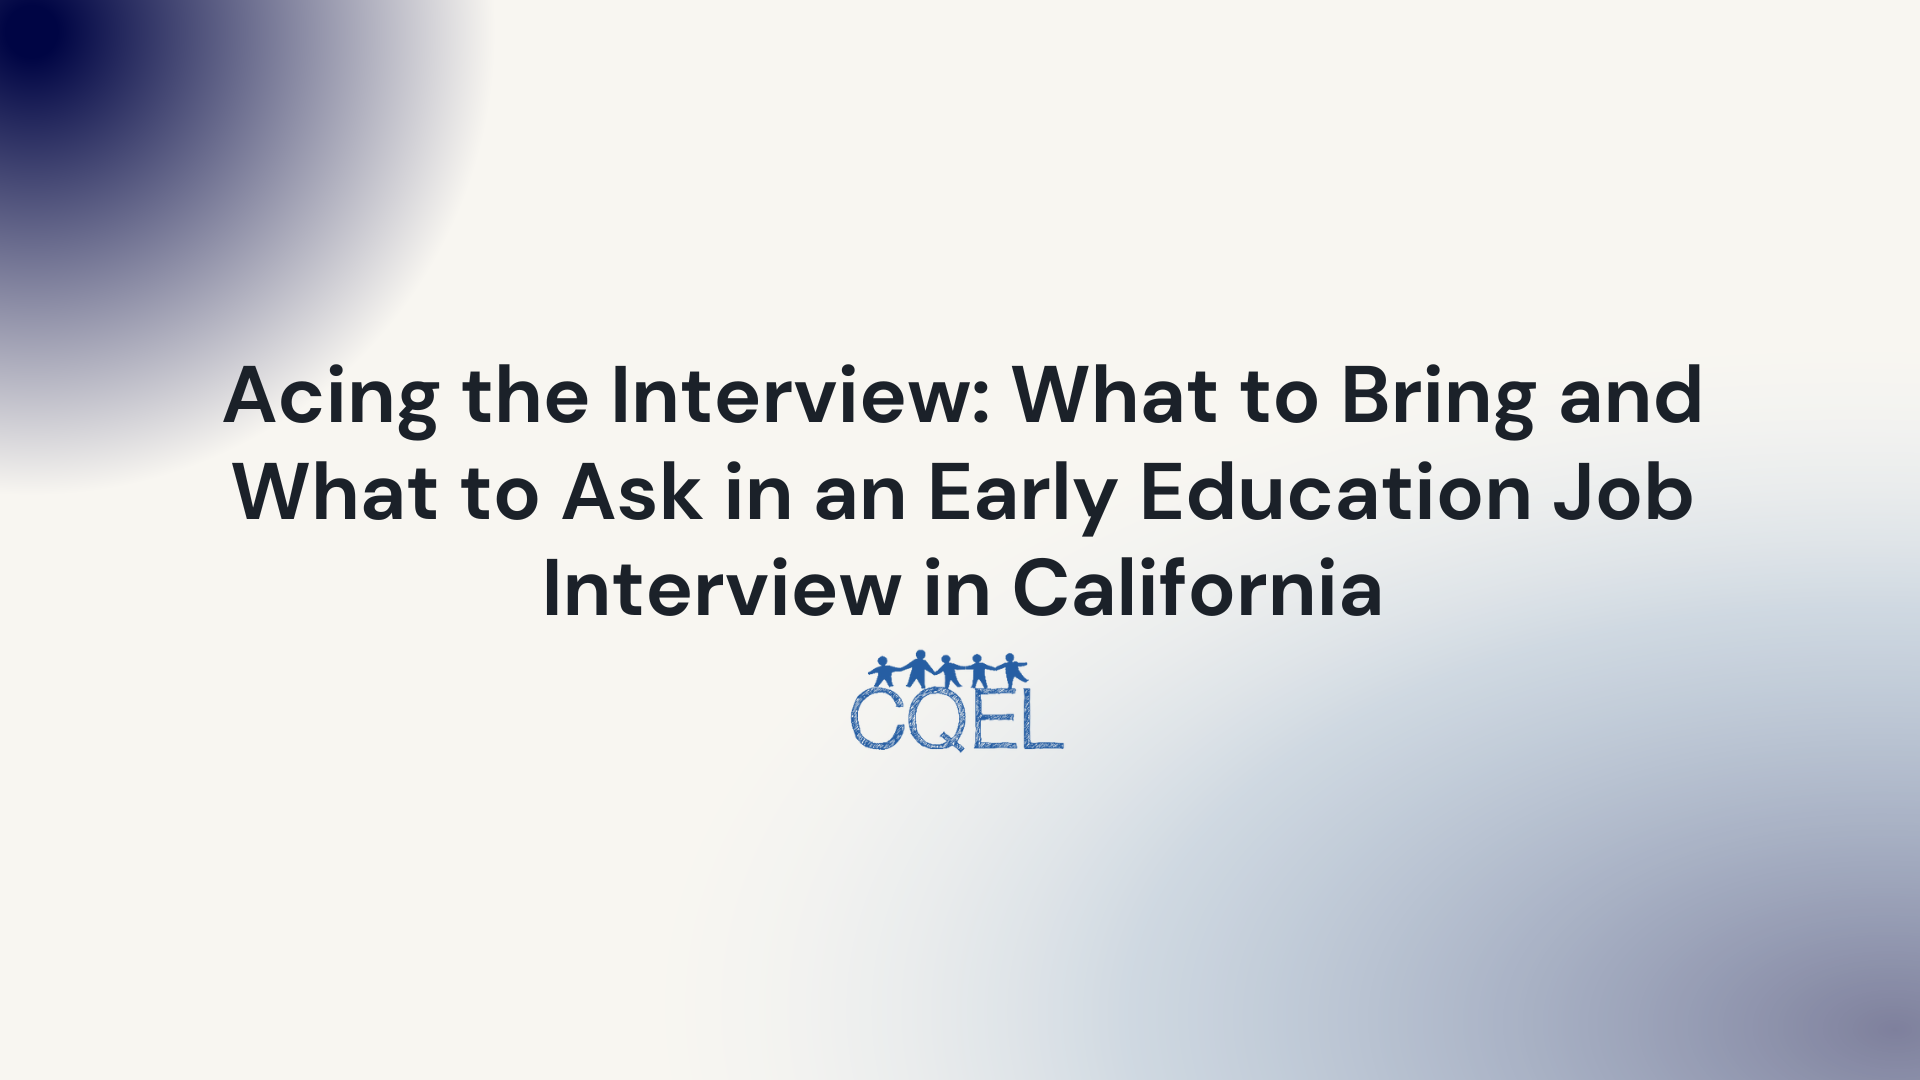 Acing the Interview: What to Bring and What to Ask in an Early Education Job Interview in California